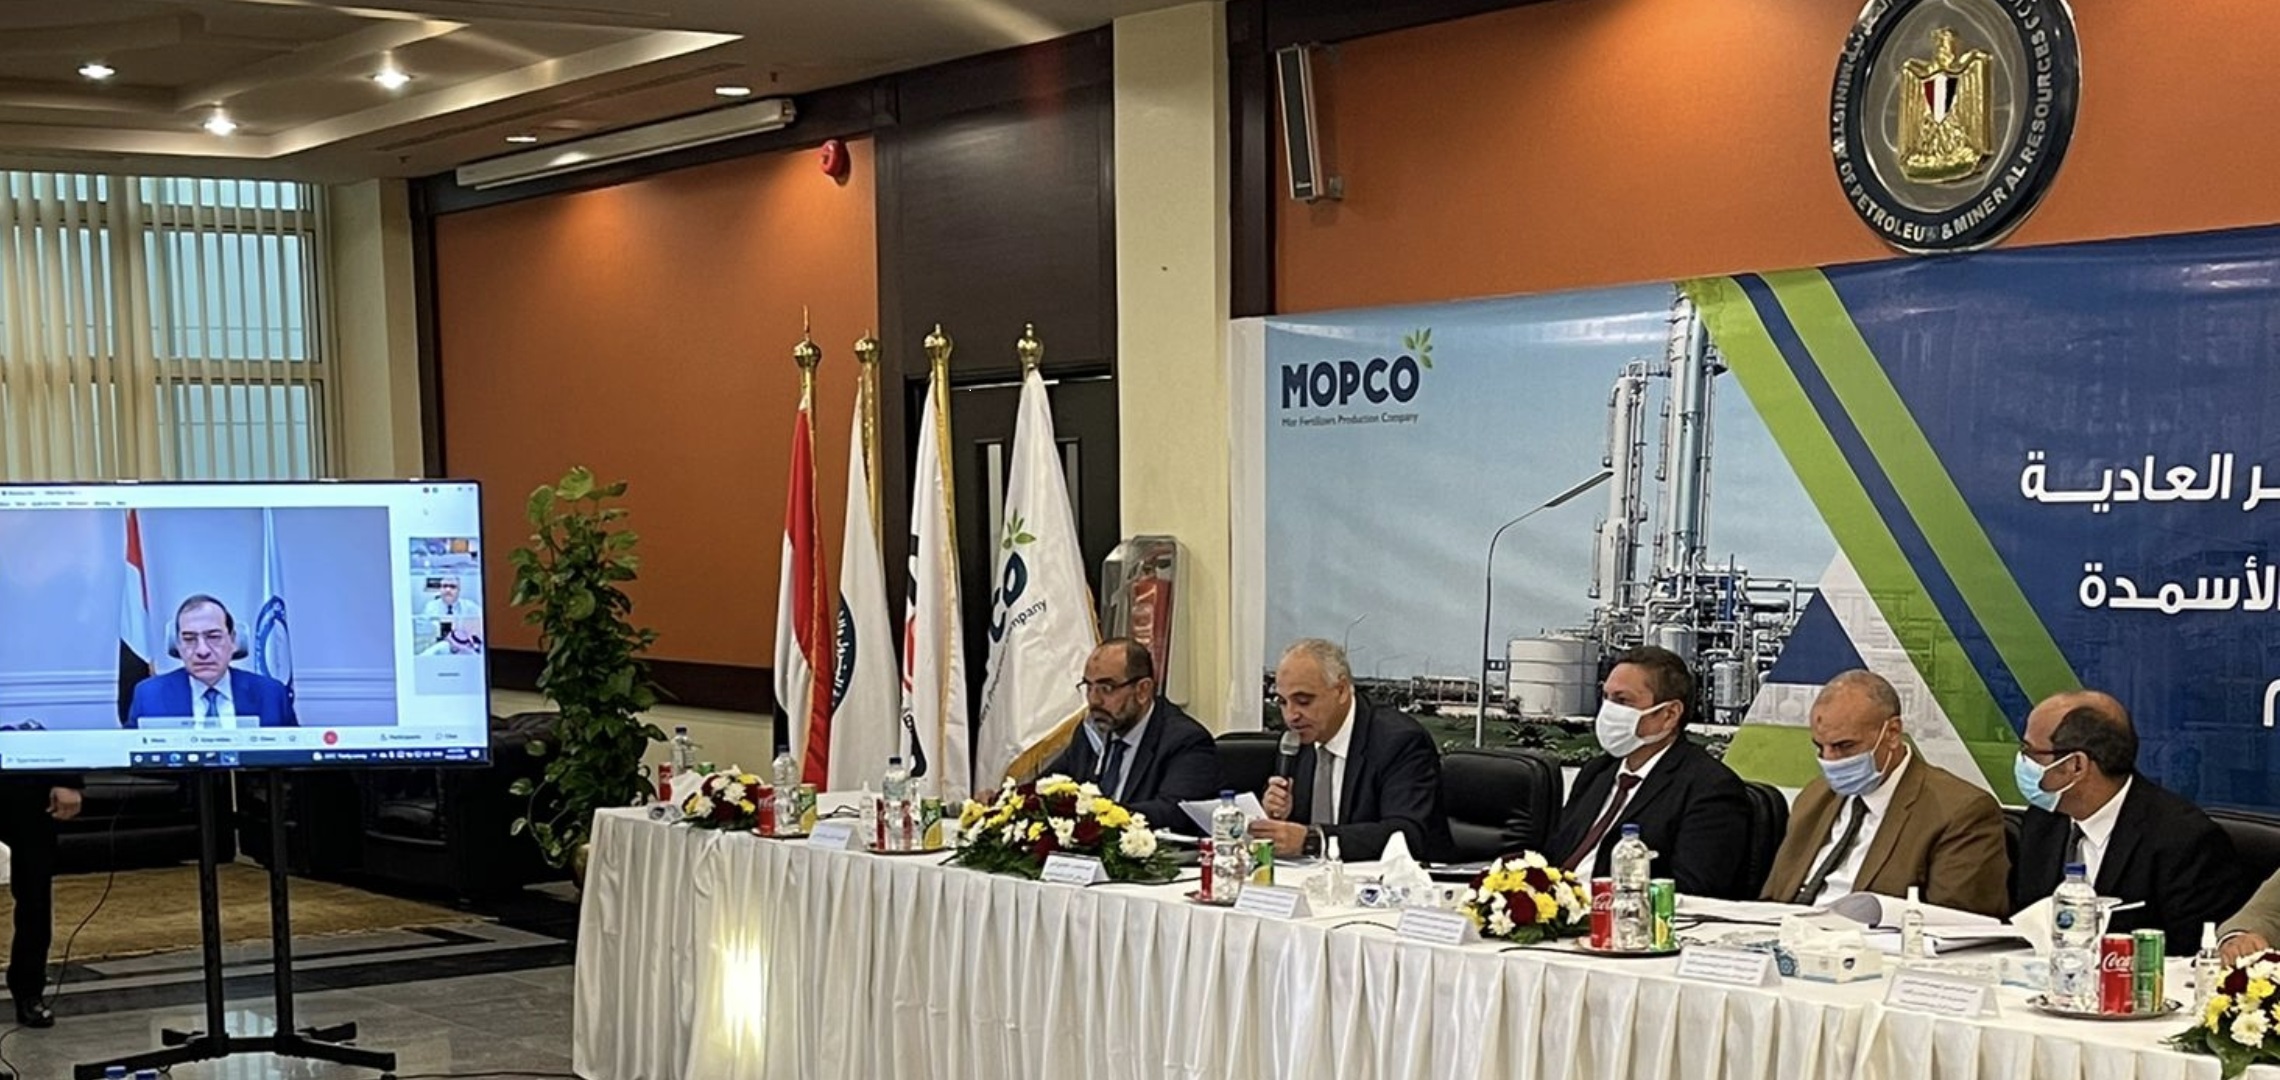 The Extraordinary General Assembly of the Misr Fertilizer Production Company (MOPCO)